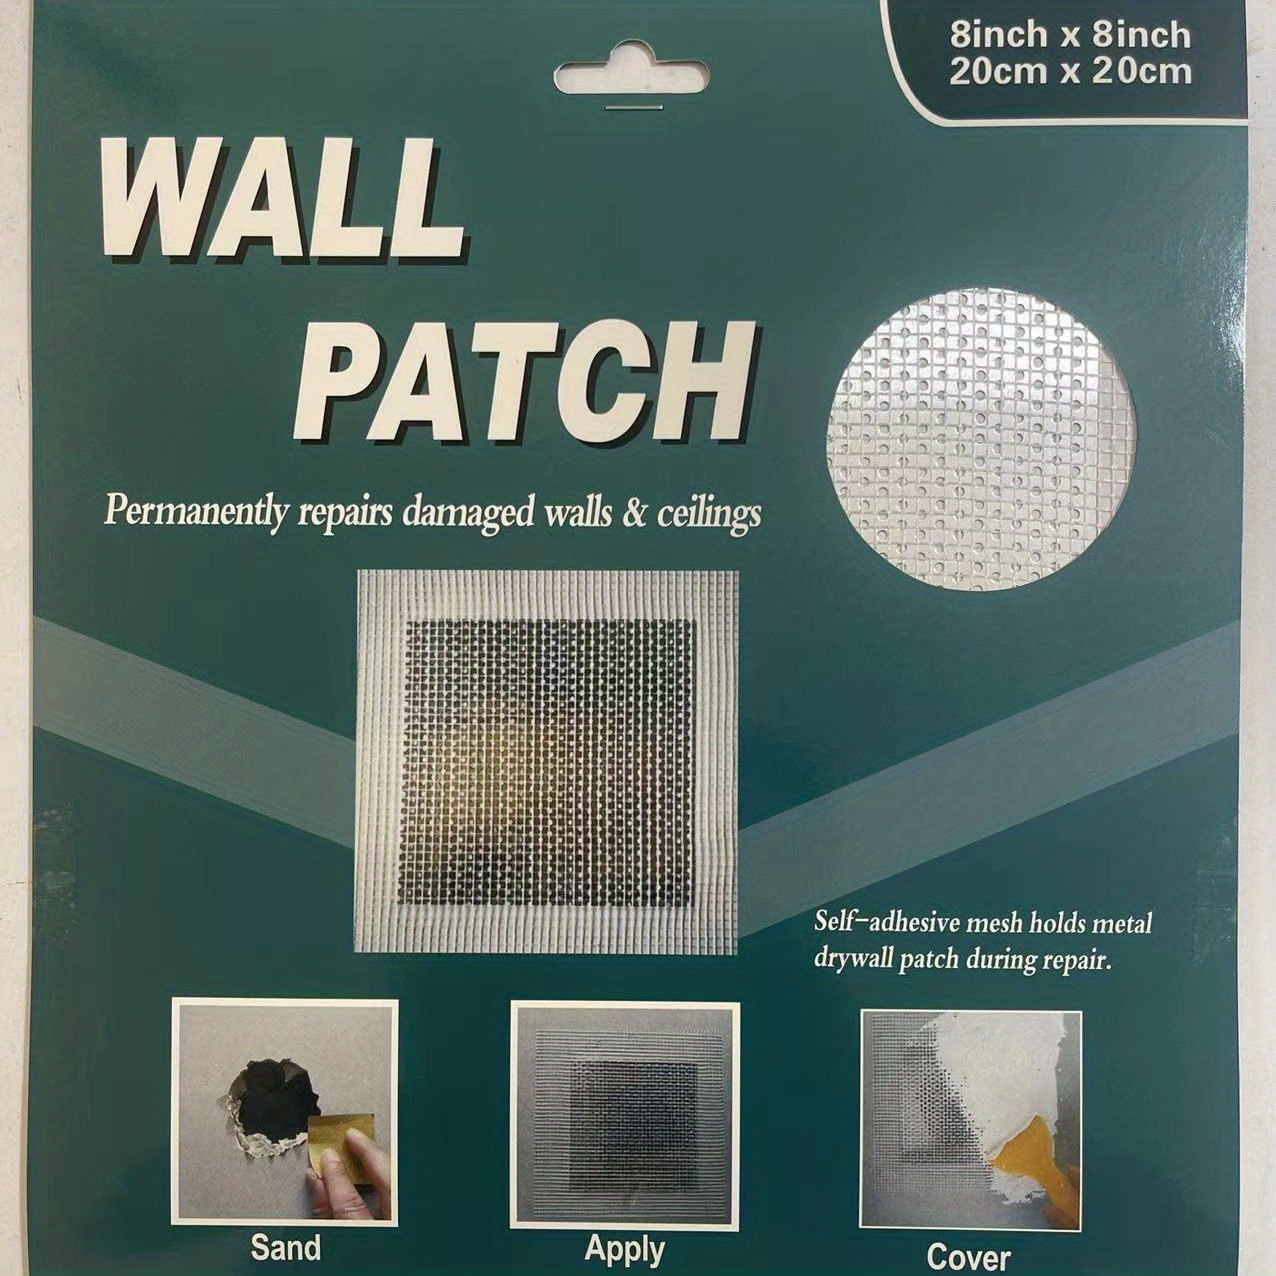 WDSHCR Drywall Repair Kit 12 Pieces Aluminum Wall Repair Patch Kit, 4/6/8 inch Fiber Mesh Over Galvanized Plate, Dry Wall Hole Repair Patch Metal